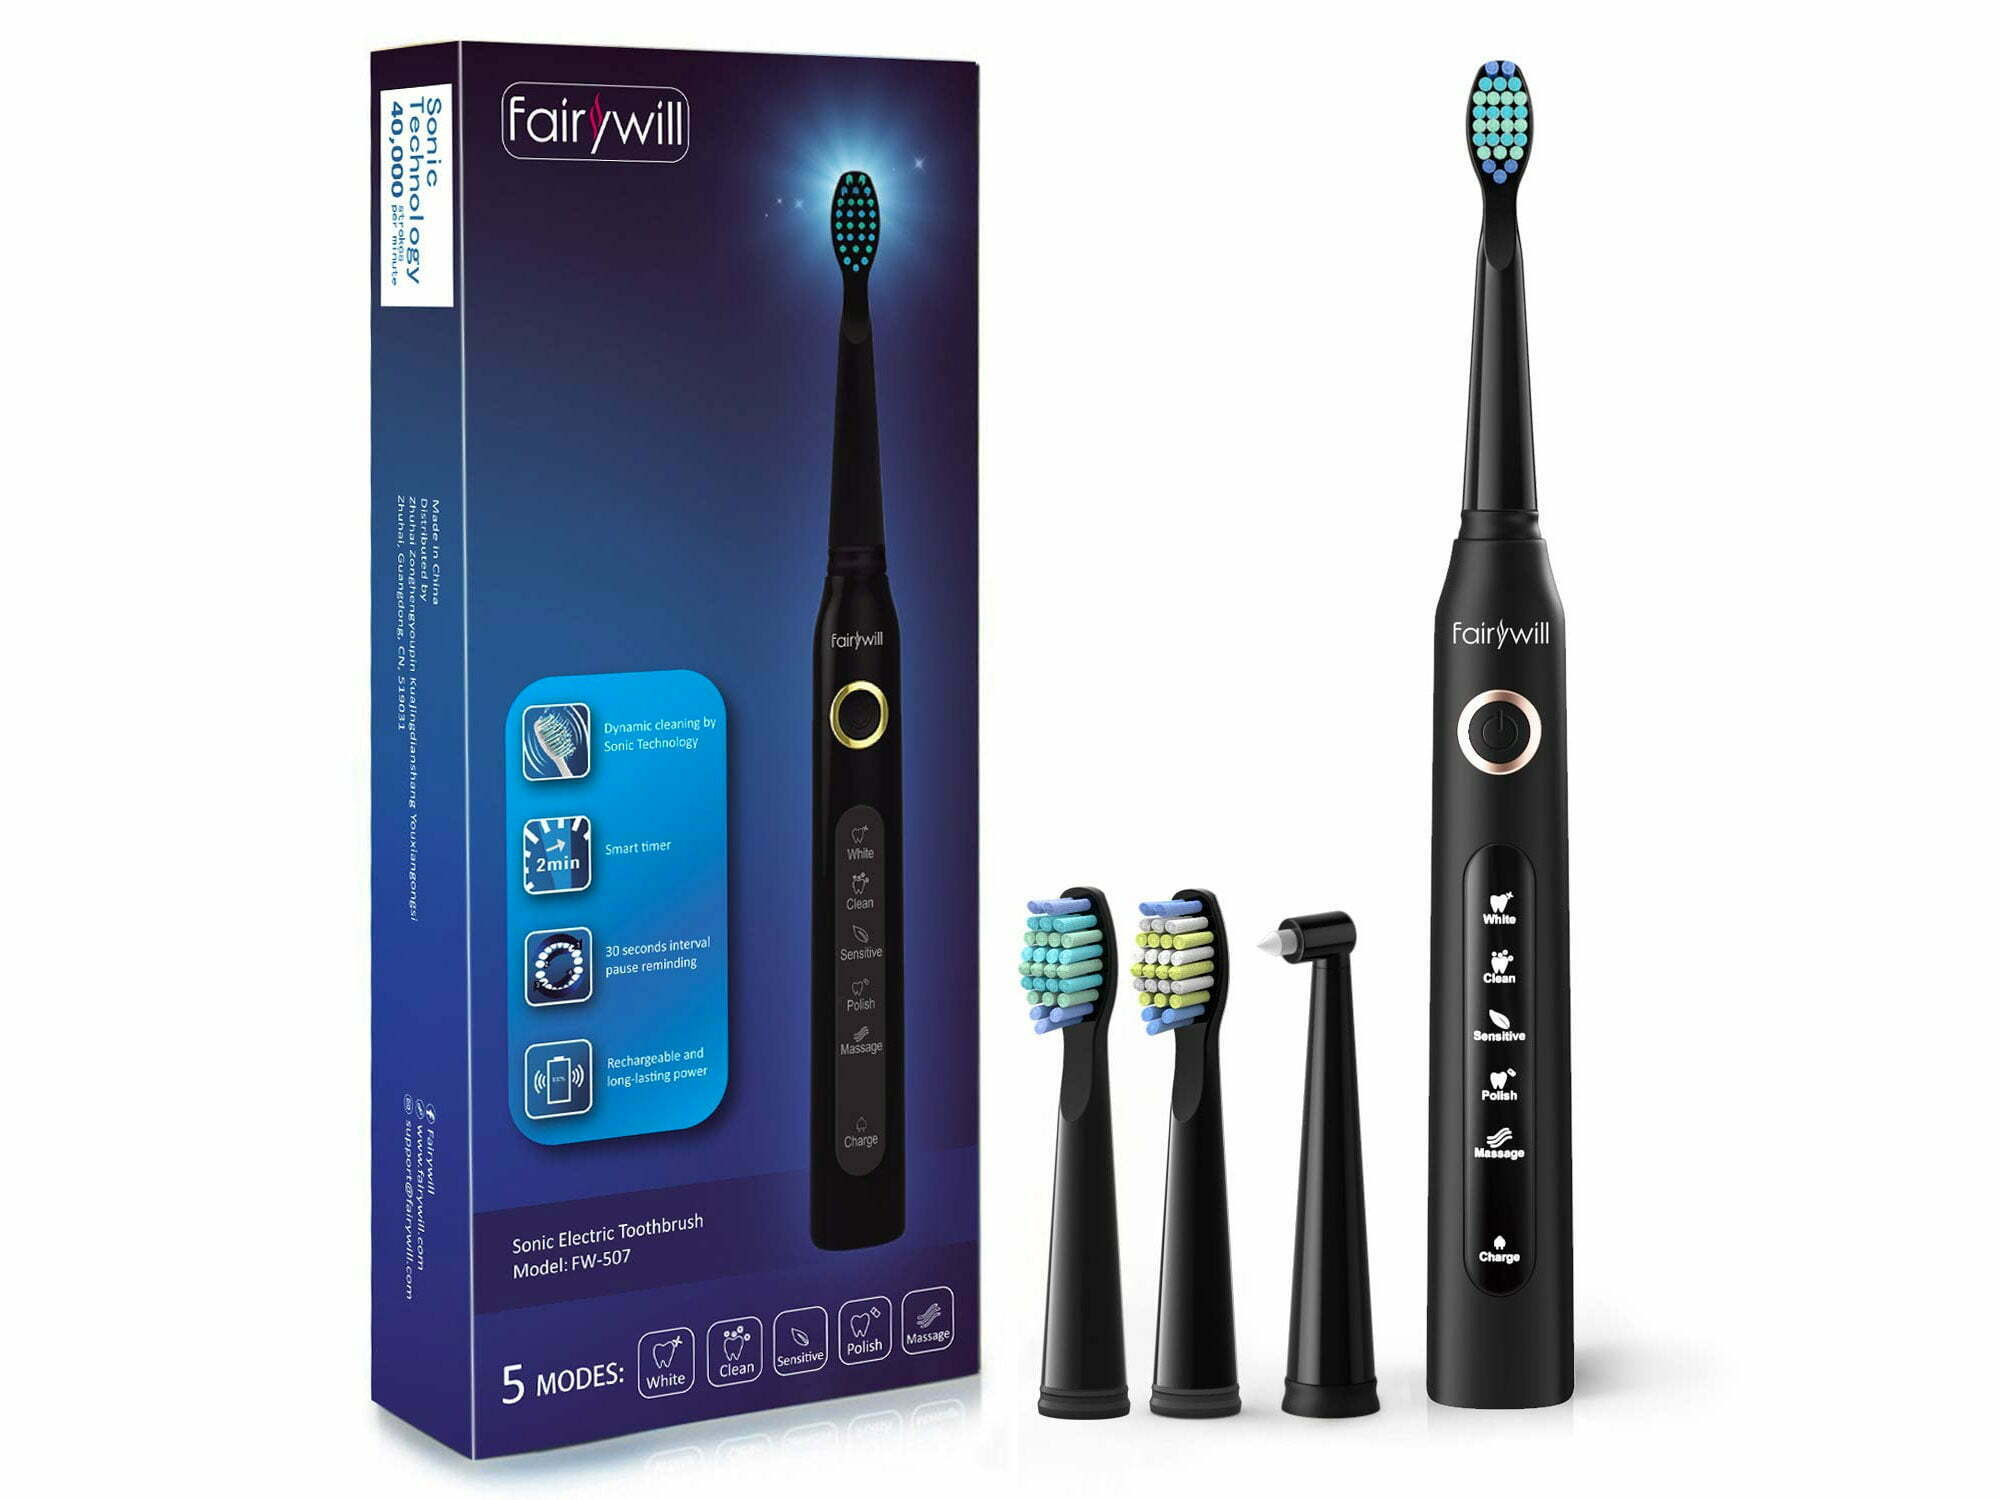 Fairywill rechargeable sonic toothbrush